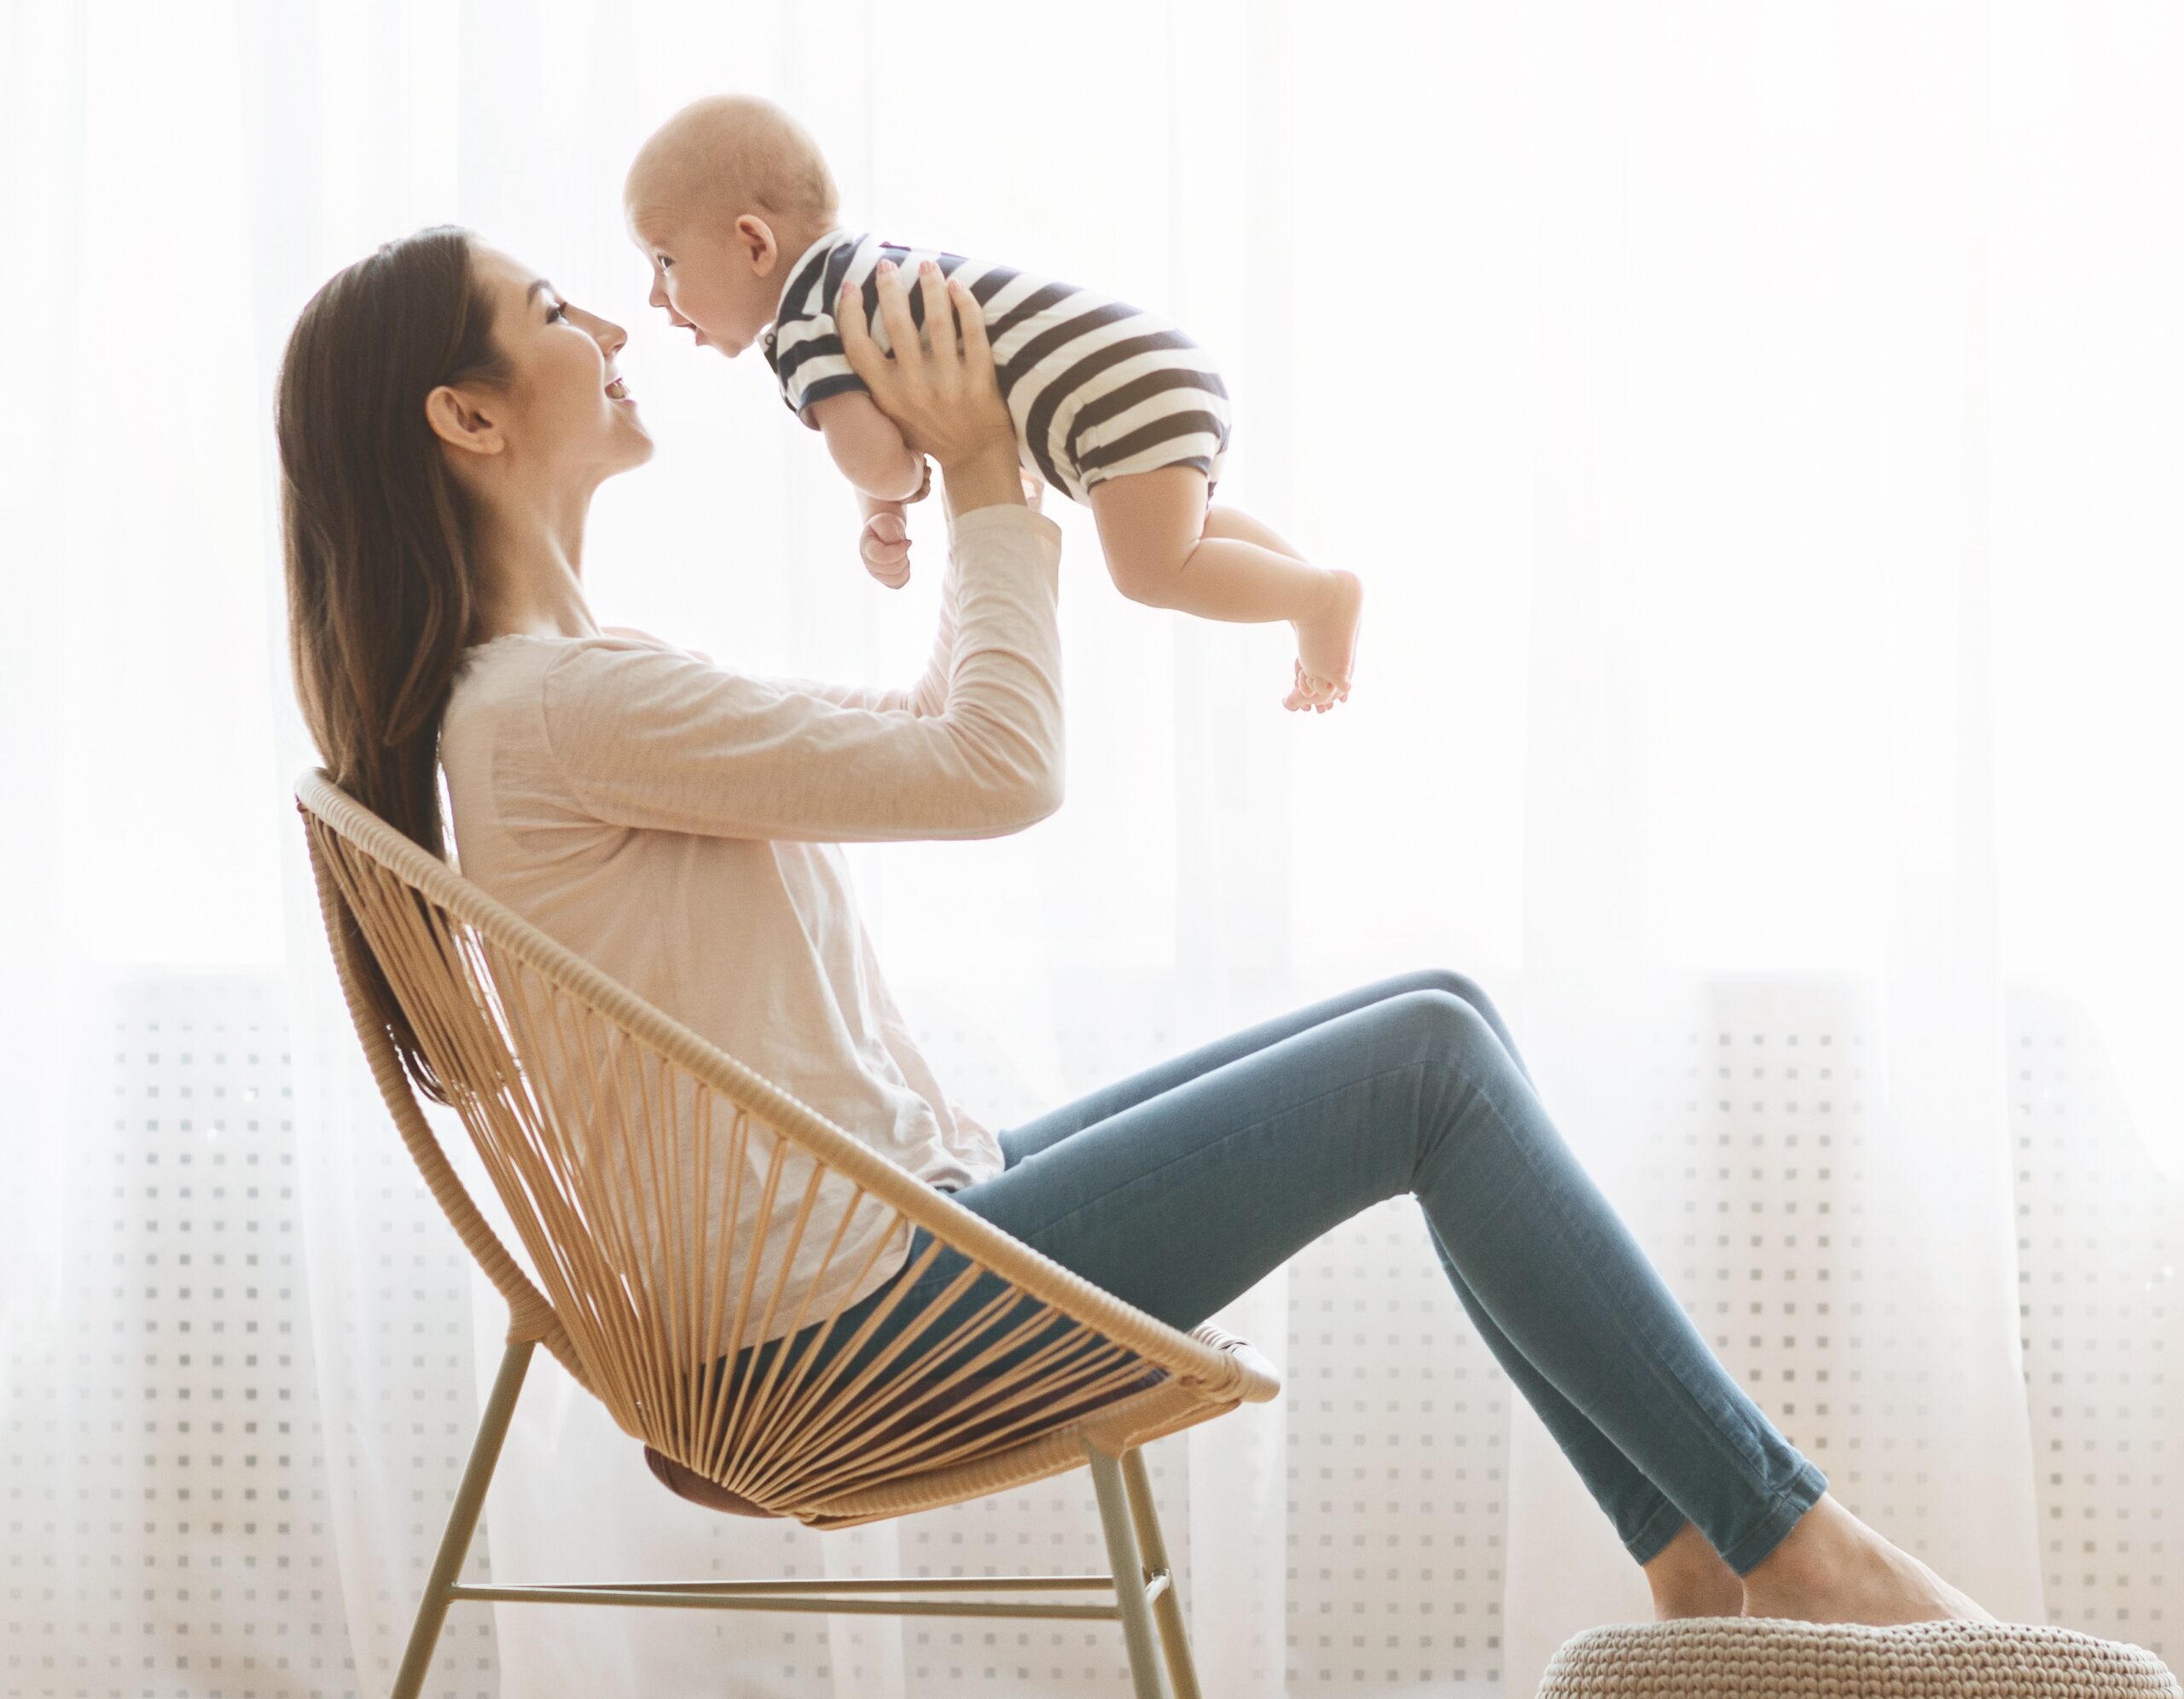 Mother sitting in chair and lifting her newborn child up